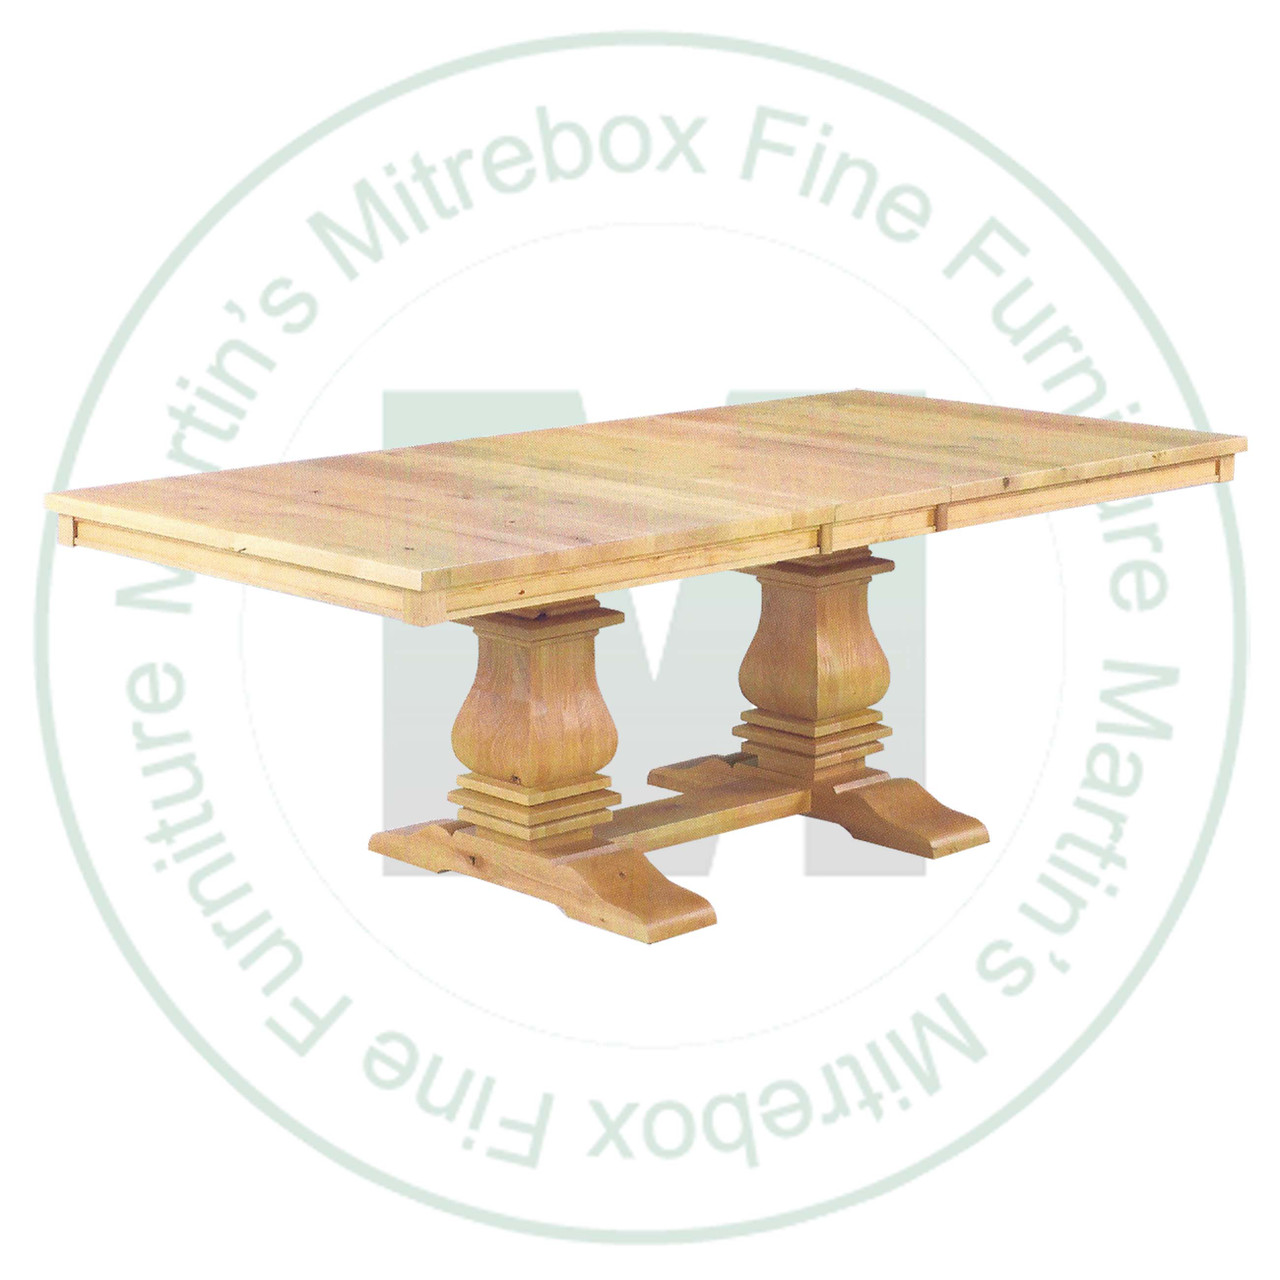 Maple Mediterranean Solid Top Pedestal Table 48''D x 108''W x 30''H And 2 - 16'' Extensions. Table Has 1.25'' Thick Top